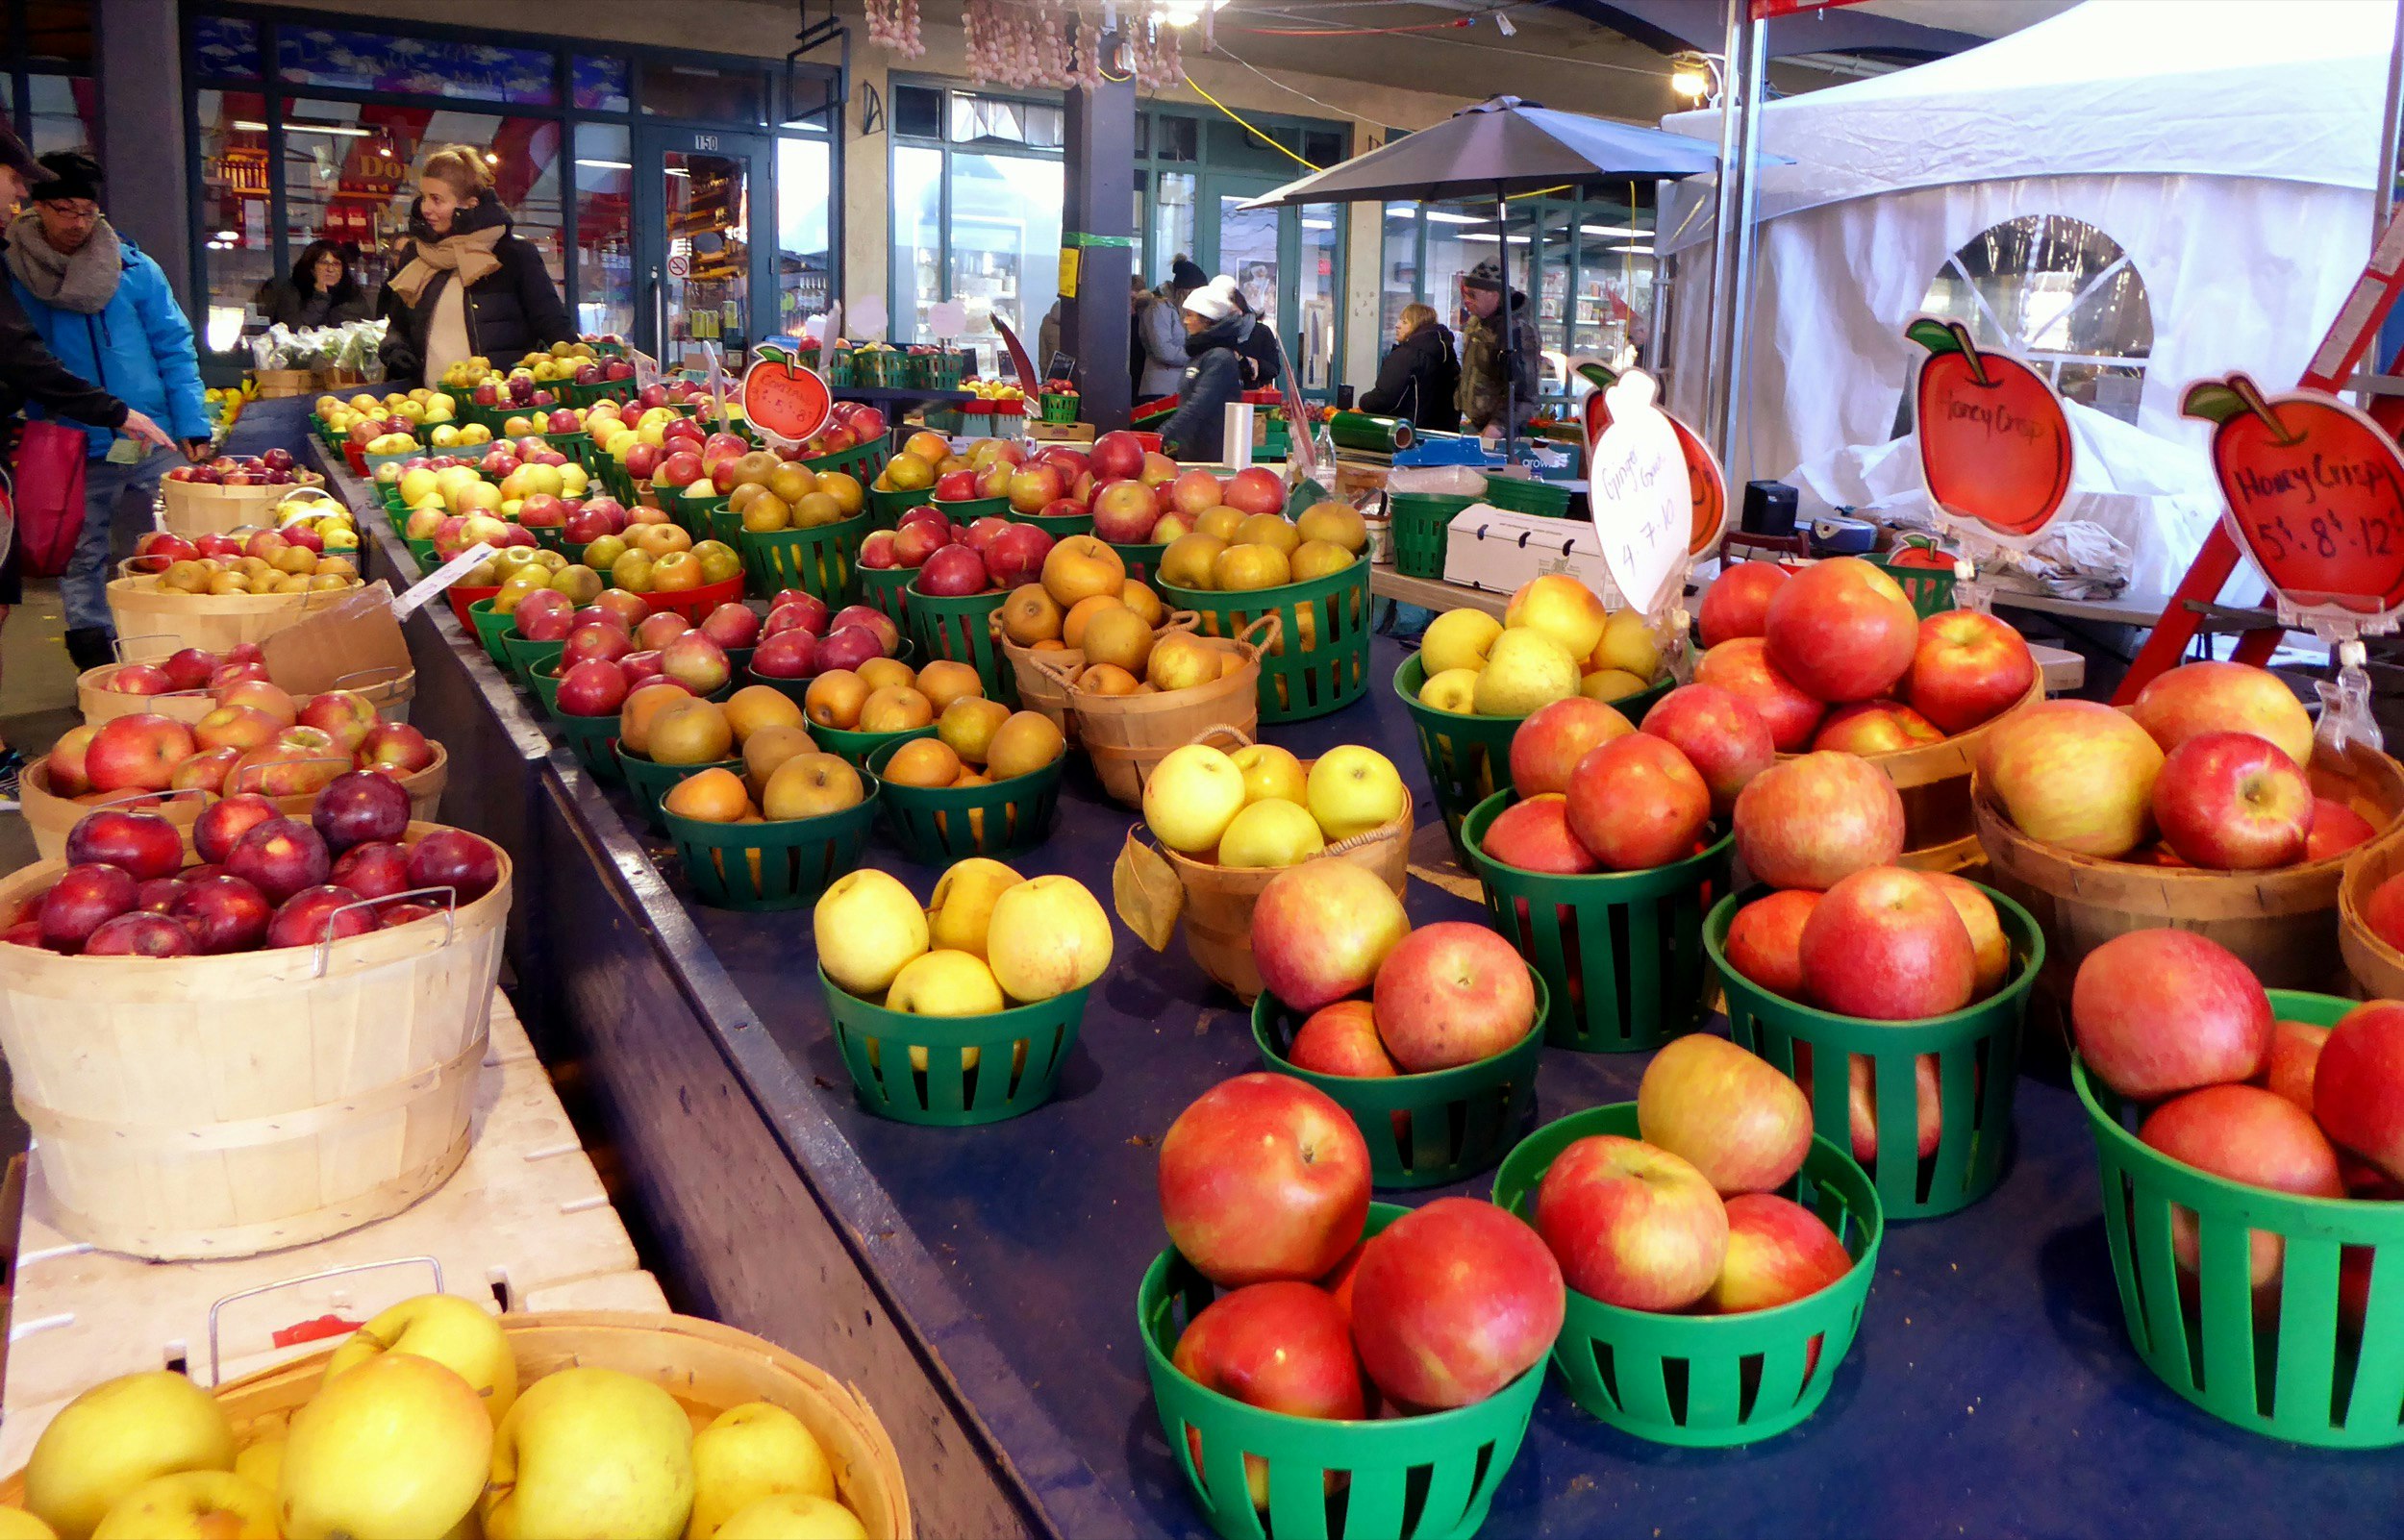 Apples are spread out on a table in a market as people mill about; Fall in Montreal